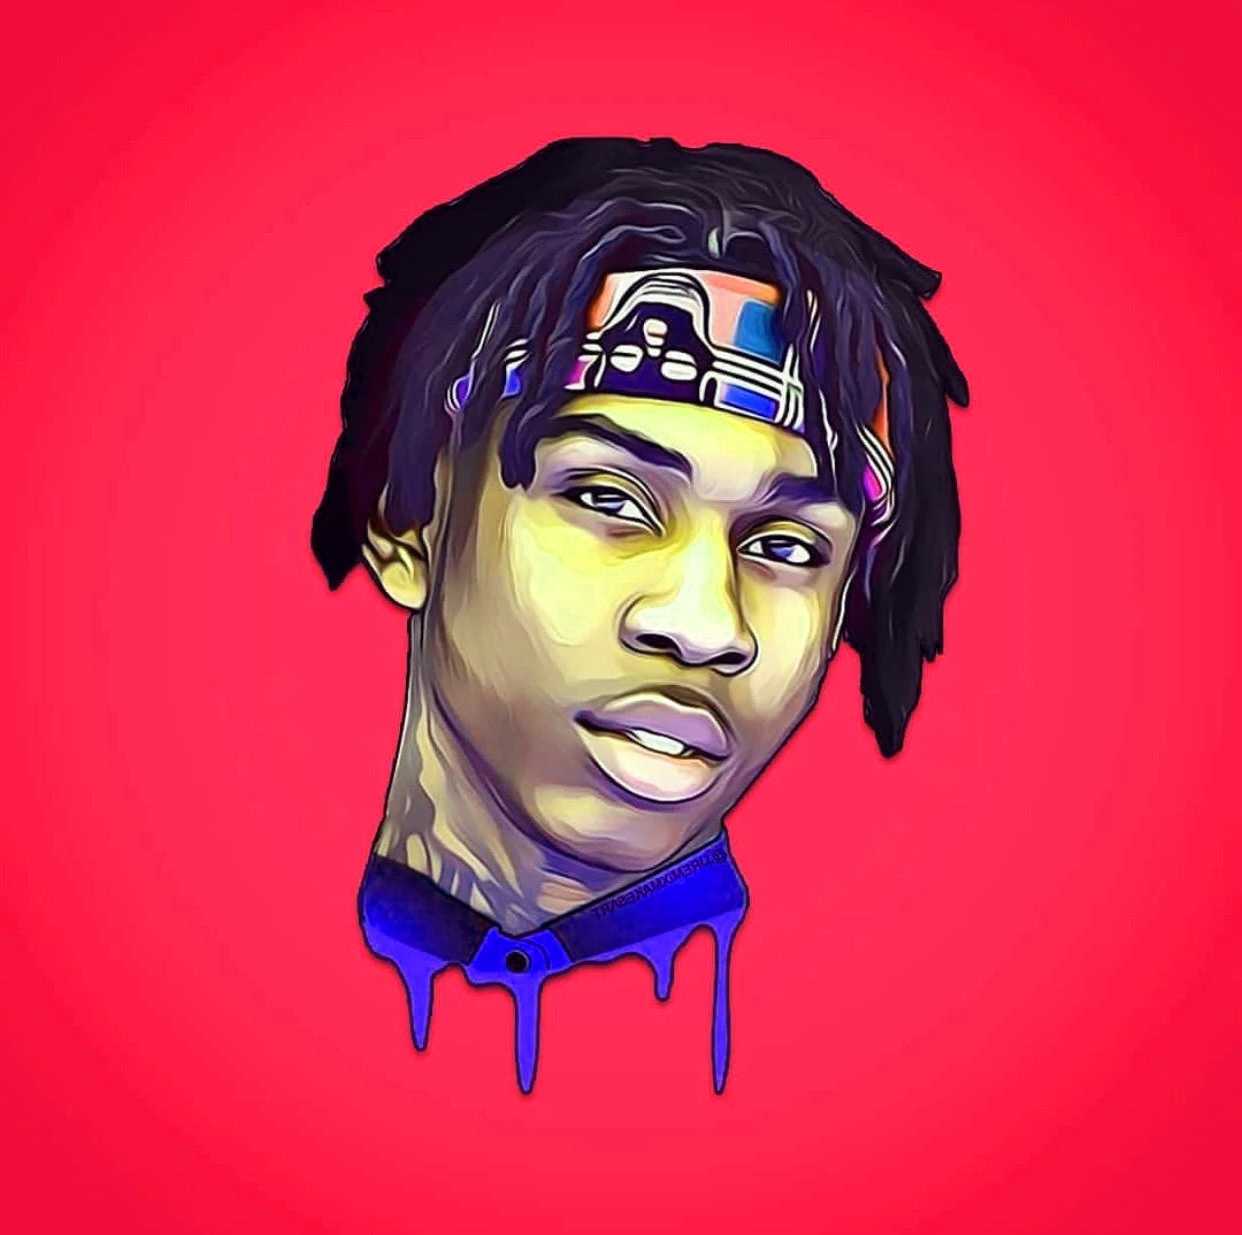 Download Polo G Animated Art Wallpaper